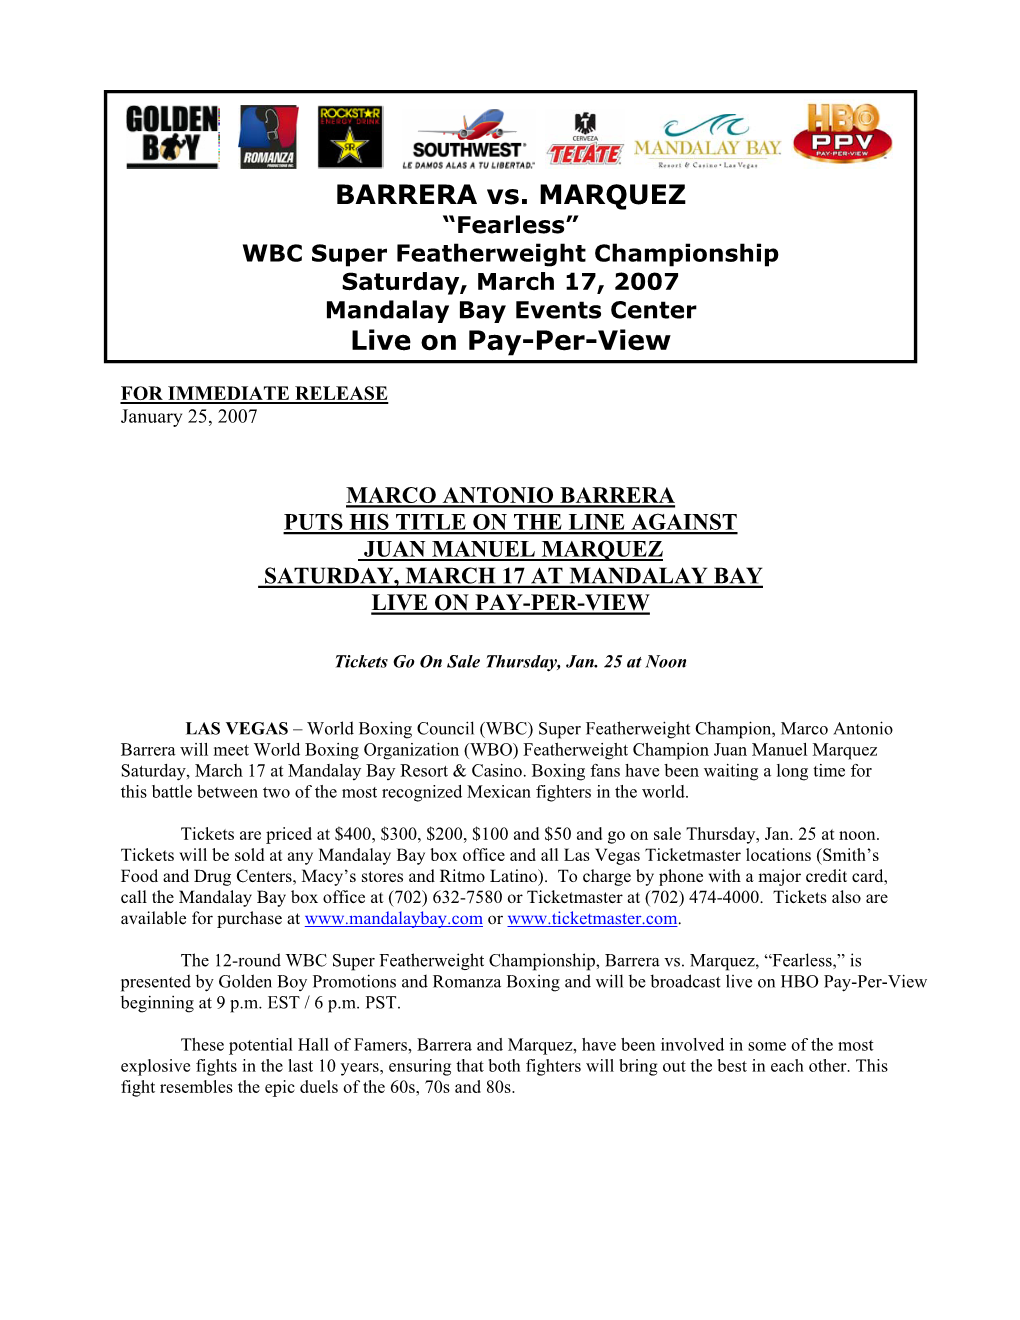 BARRERA Vs. MARQUEZ “Fearless” WBC Super Featherweight Championship Saturday, March 17, 2007 Mandalay Bay Events Center